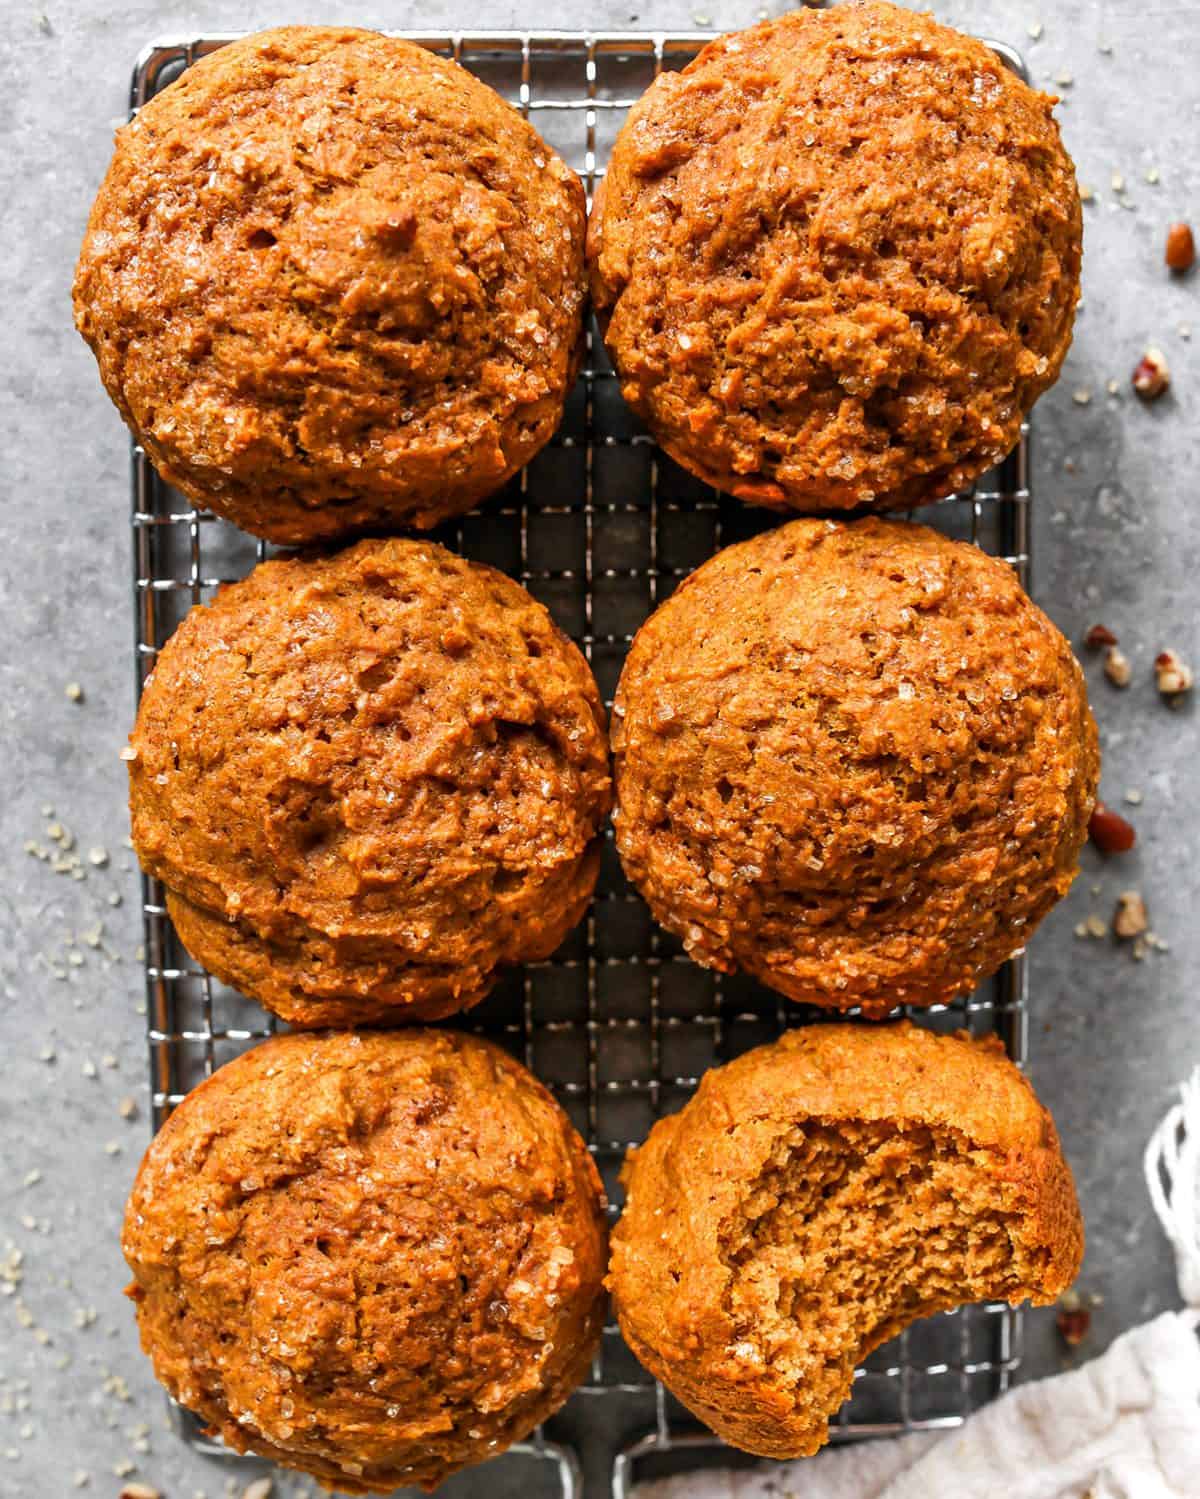 6 Healthy Pumpkin Muffins on a wire cooling rack, one has a bite taken out of it